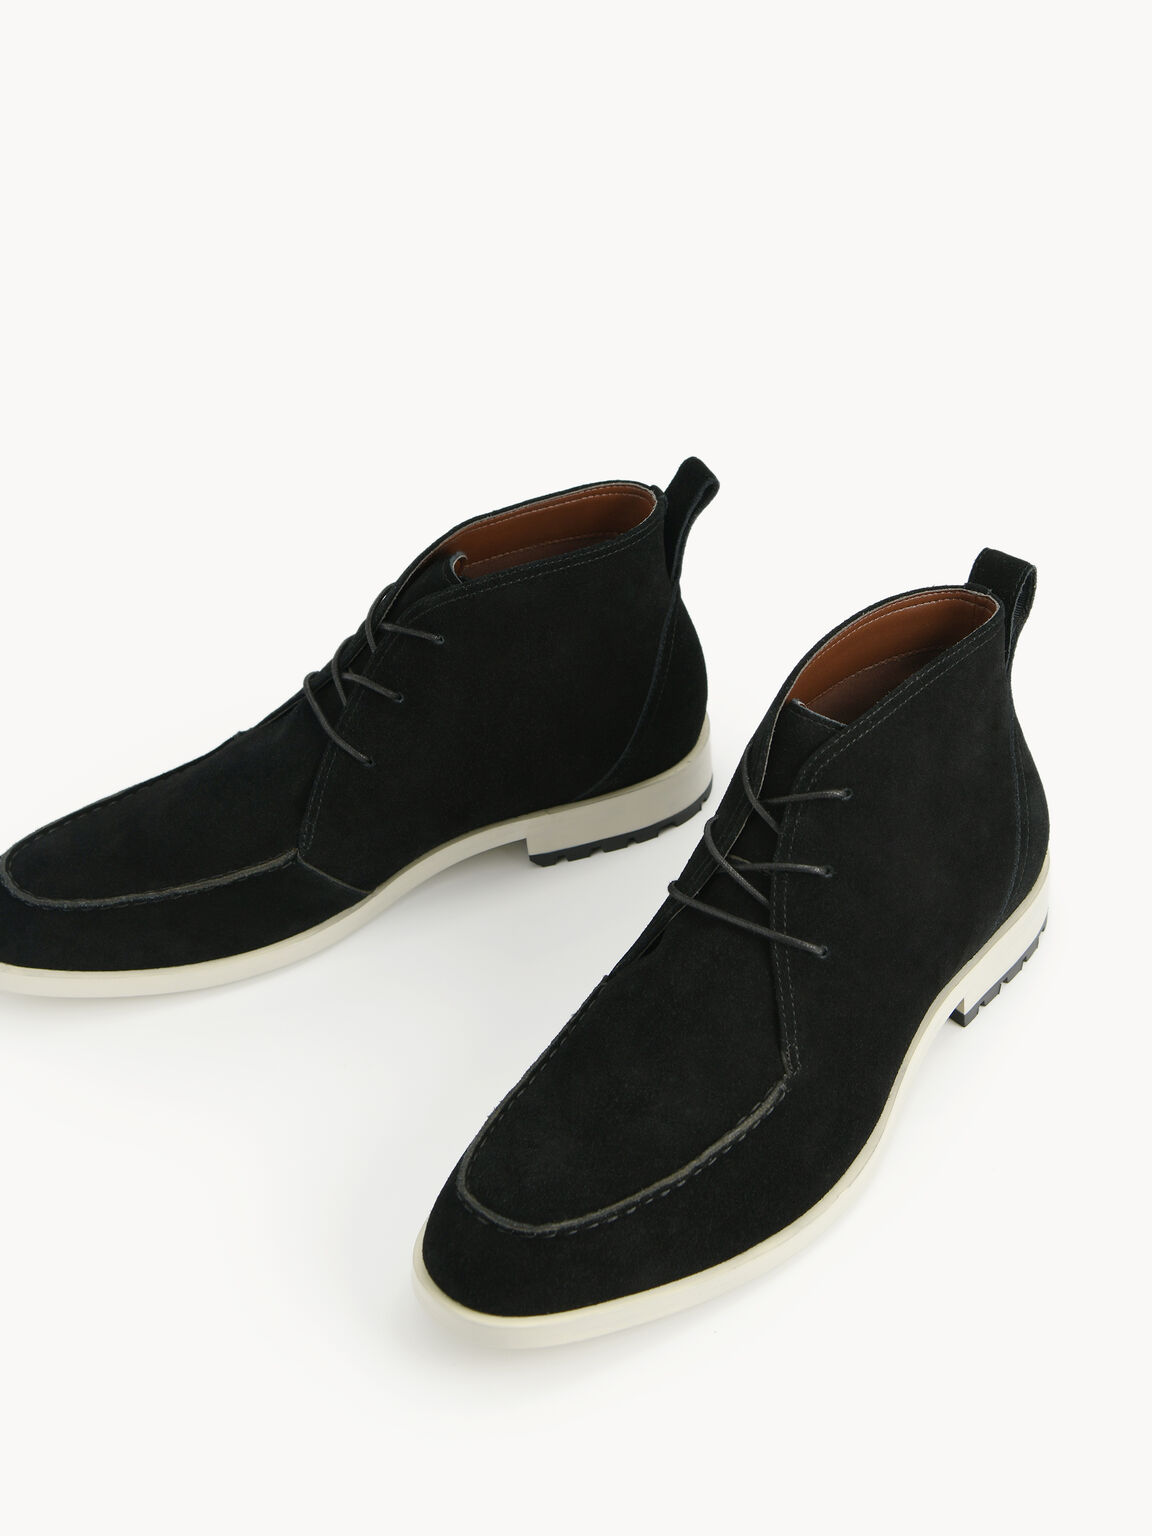 Suede Leather Boots, Black